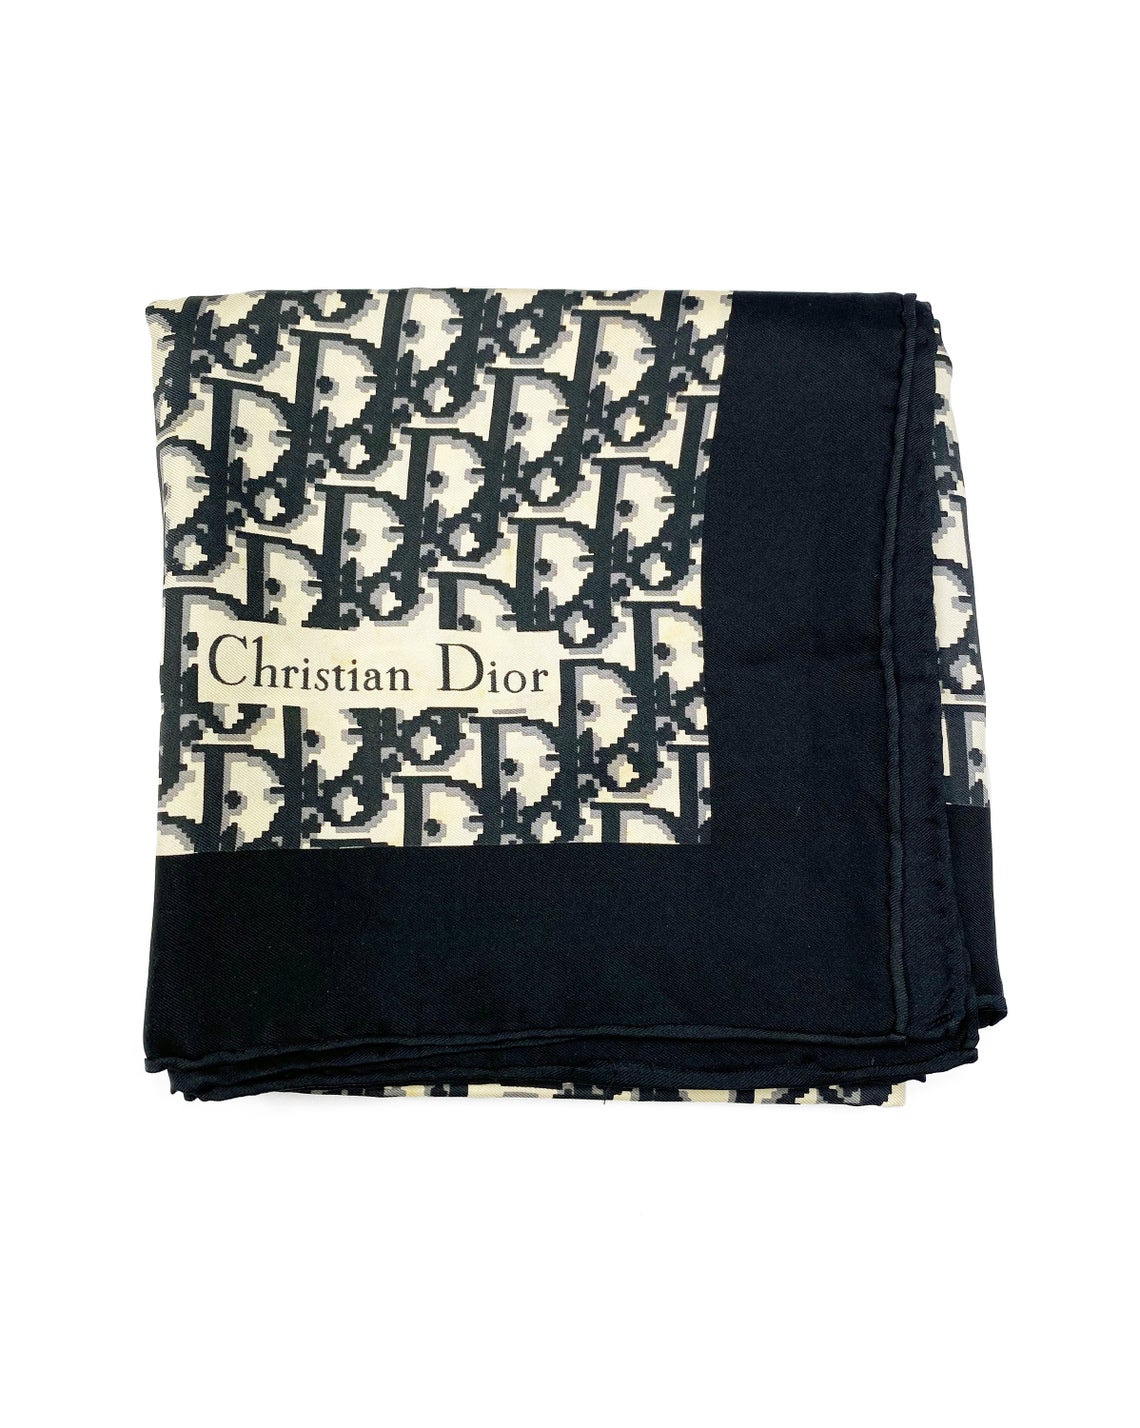 Fruit Vintage Christian Dior oblique print silk scarf in black and grey. Features a bold graphic Dior logo print and hand finished rolled hem edging.